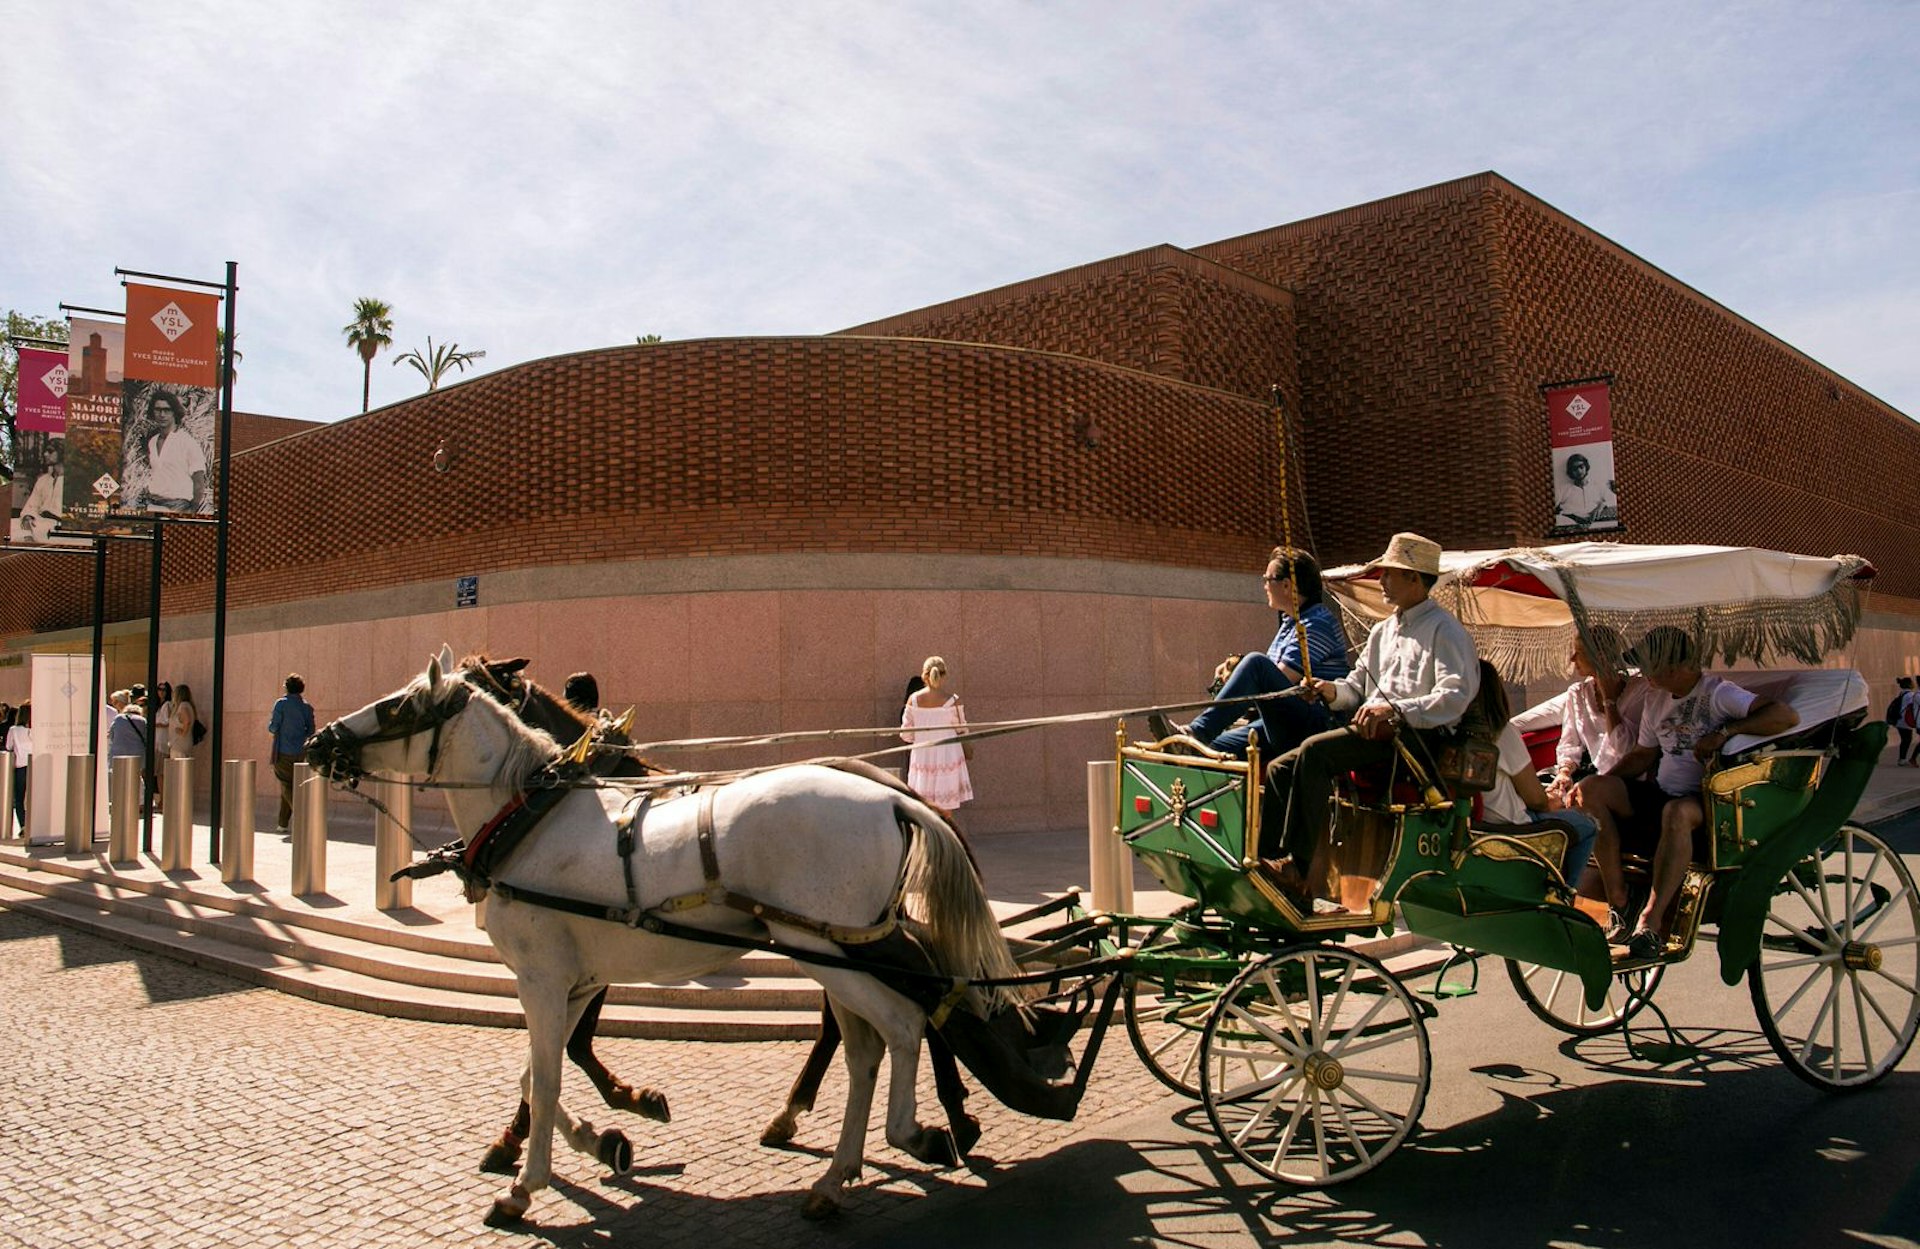 Tourists arrive to visit the new Yves Saint Laurent museum in Marrakesh, Morocco